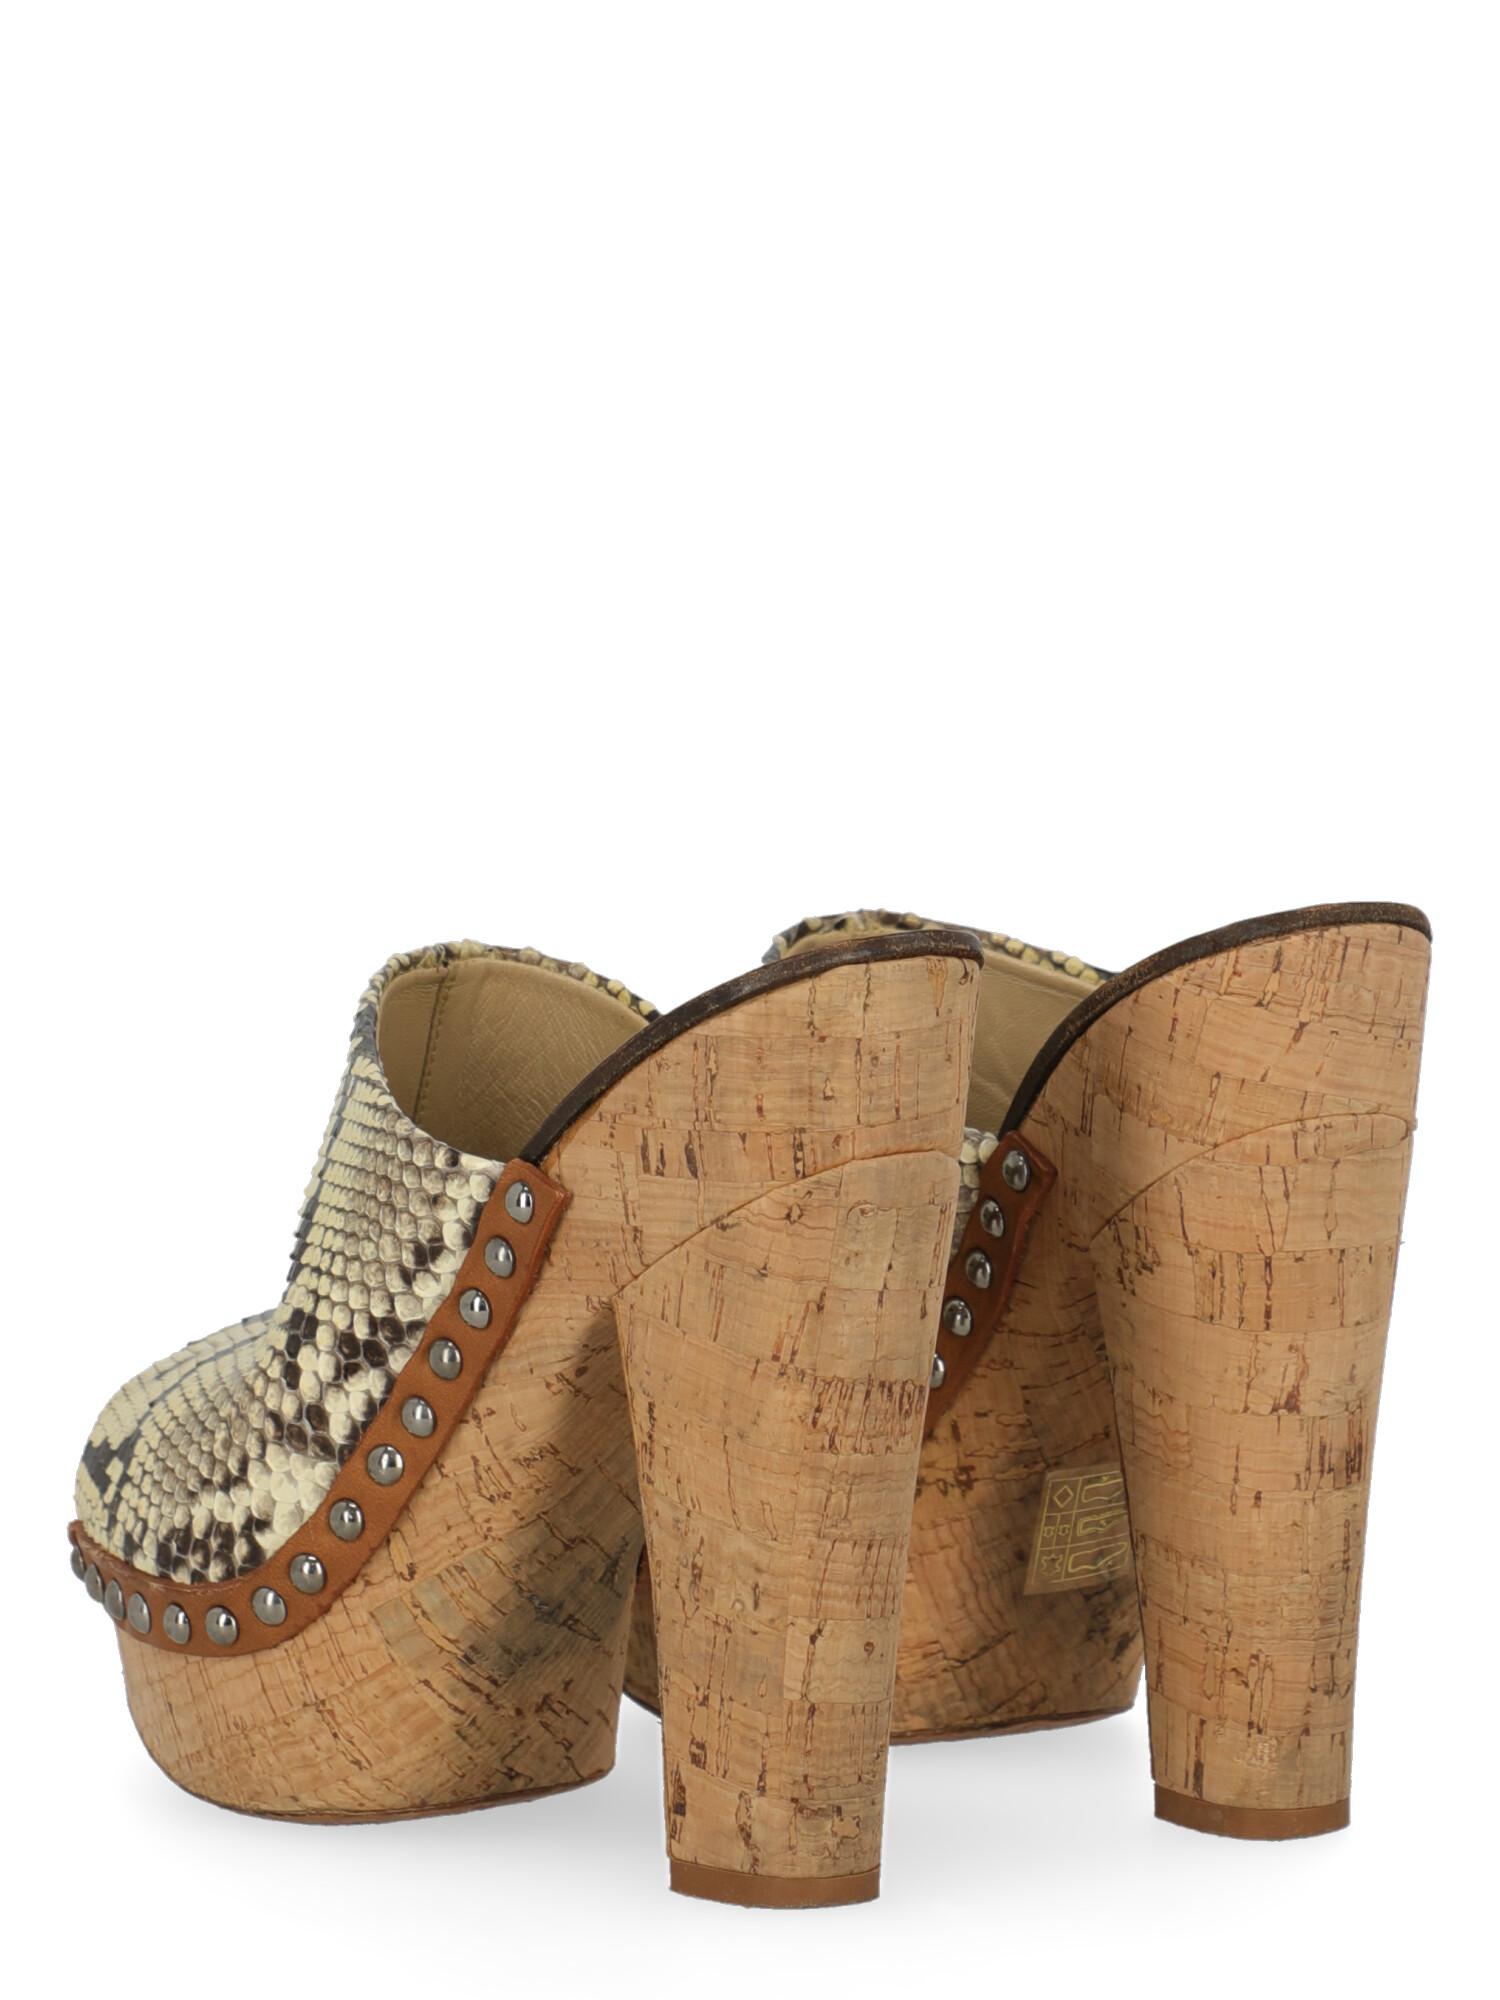 Miu Miu  Women   Wedges  Beige, Brown Leather EU 37.5 In Good Condition For Sale In Milan, IT